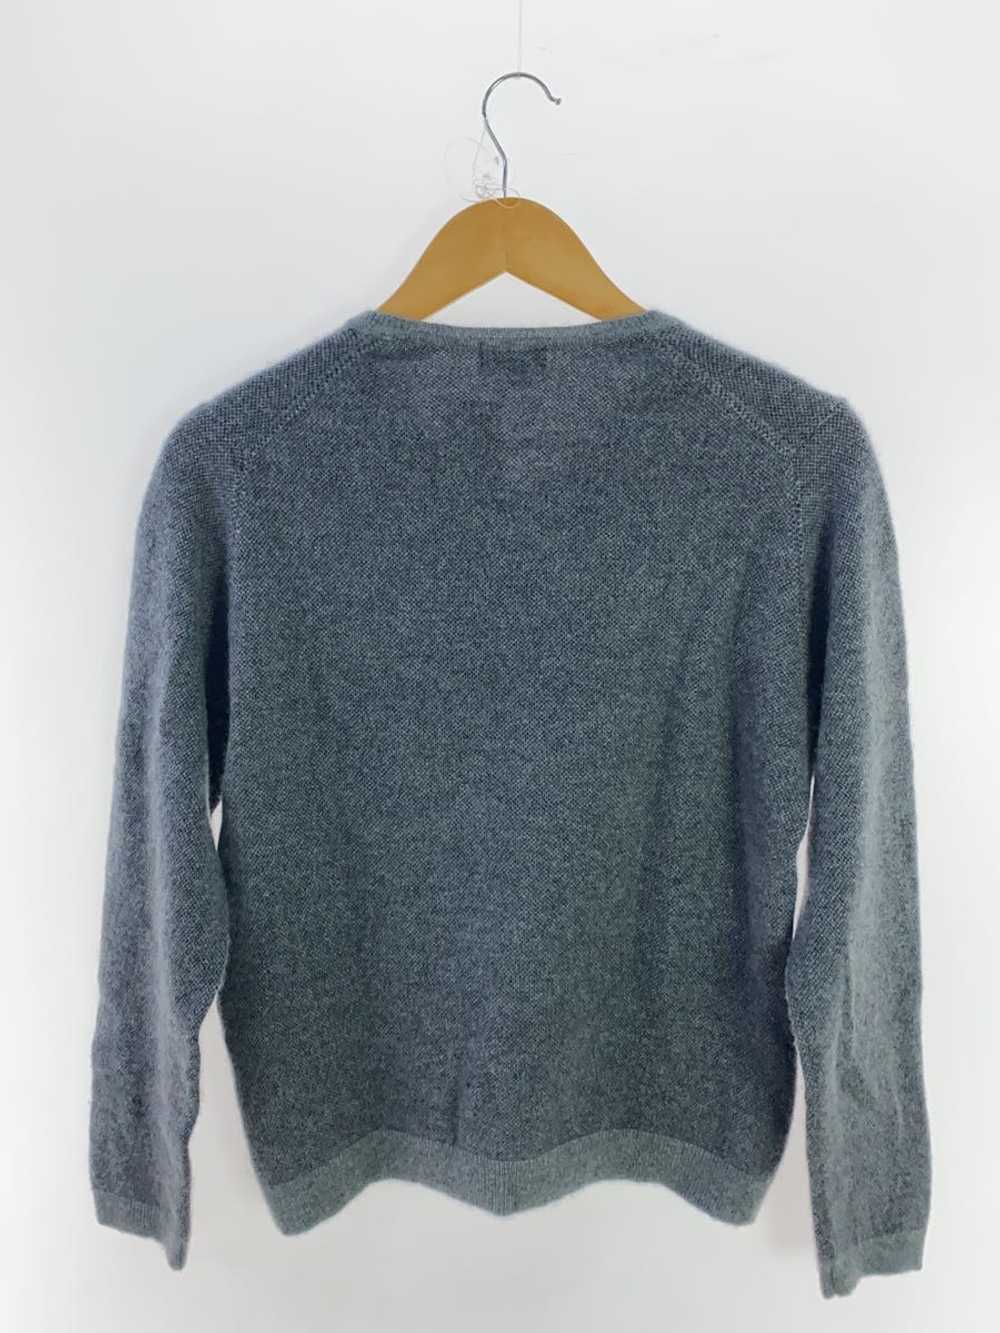 Men's Margaret Howell Sweater Thick/M/Cashmere/Gr… - image 2